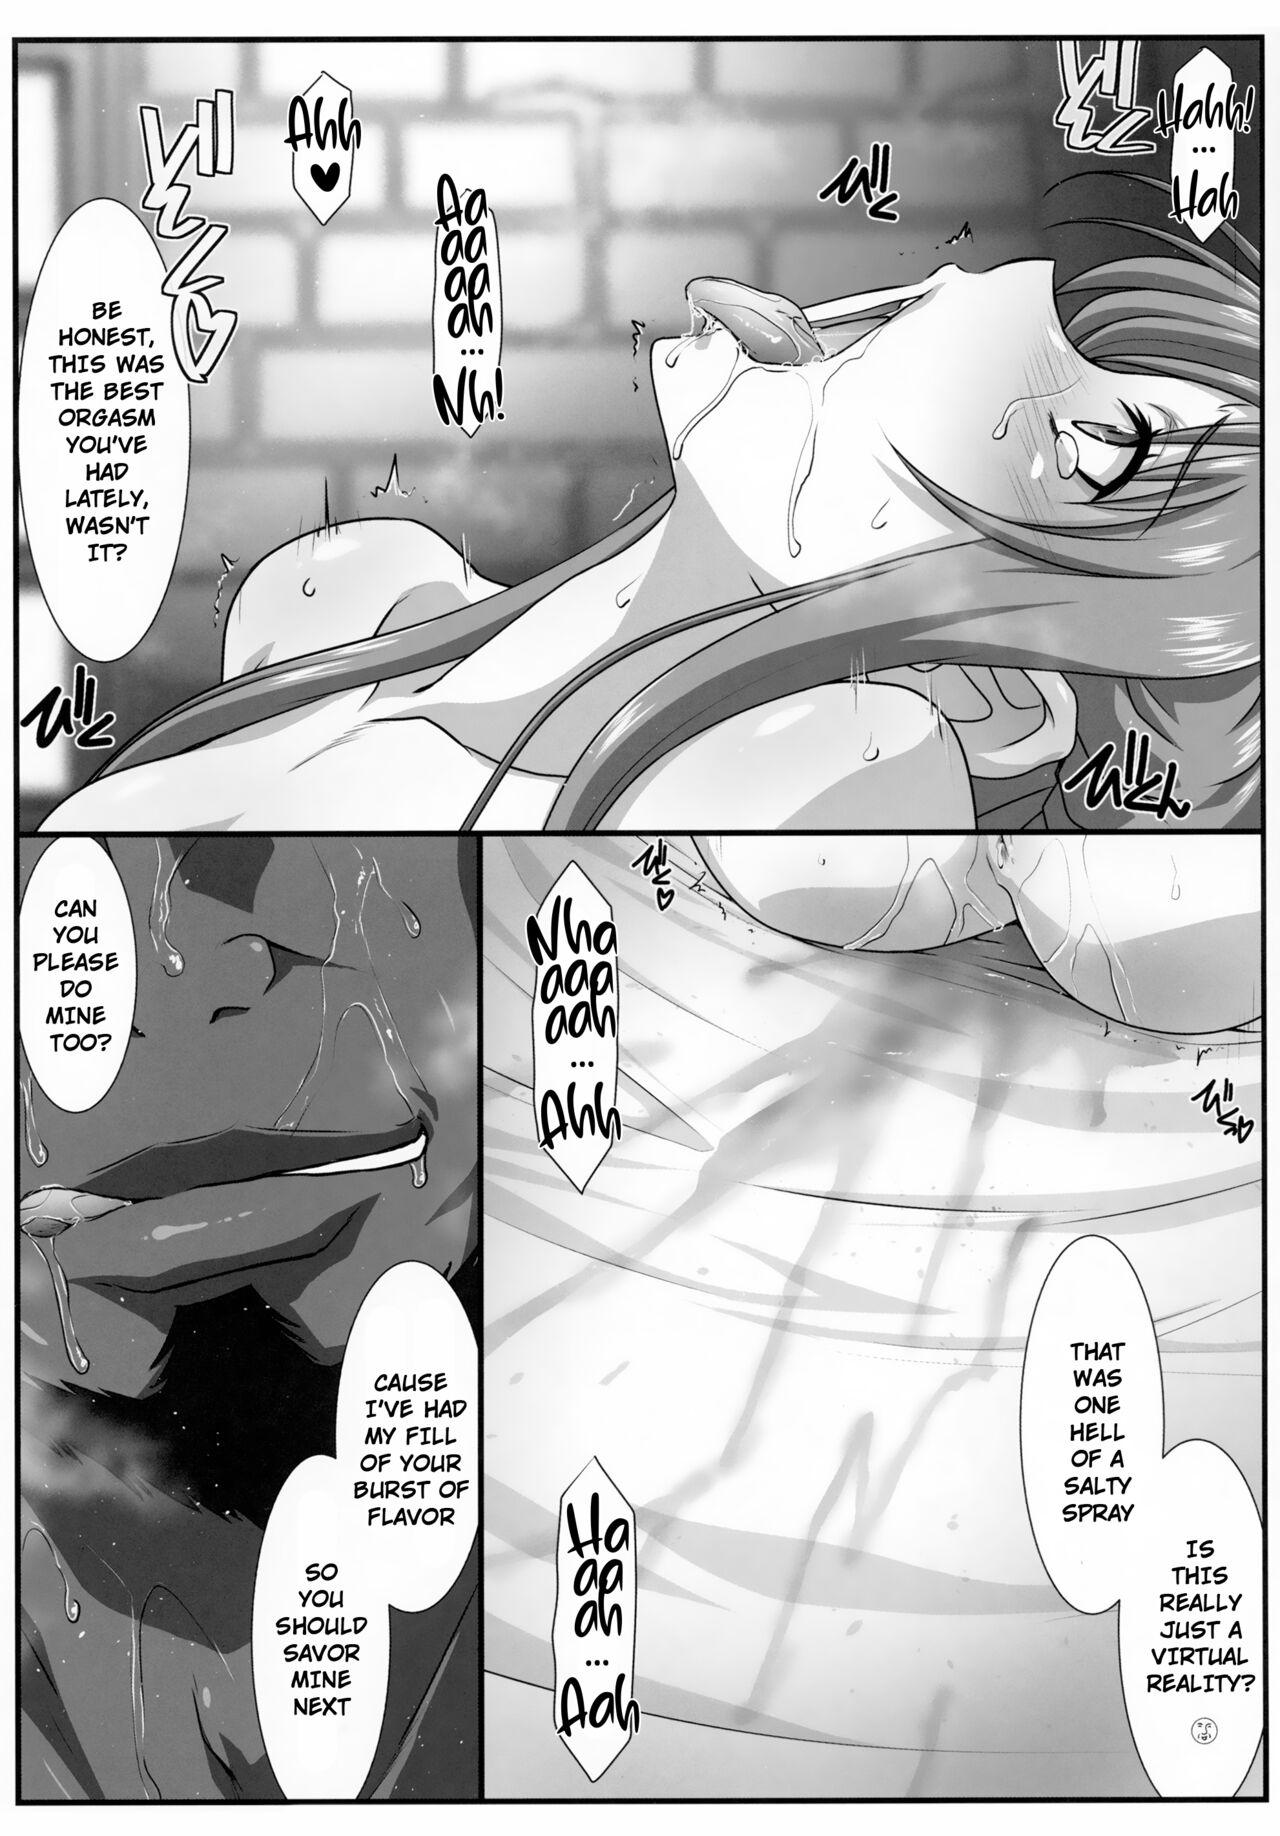 Pigtails Astral Bout Ver. 46 - Sword art online Amatuer - Page 8